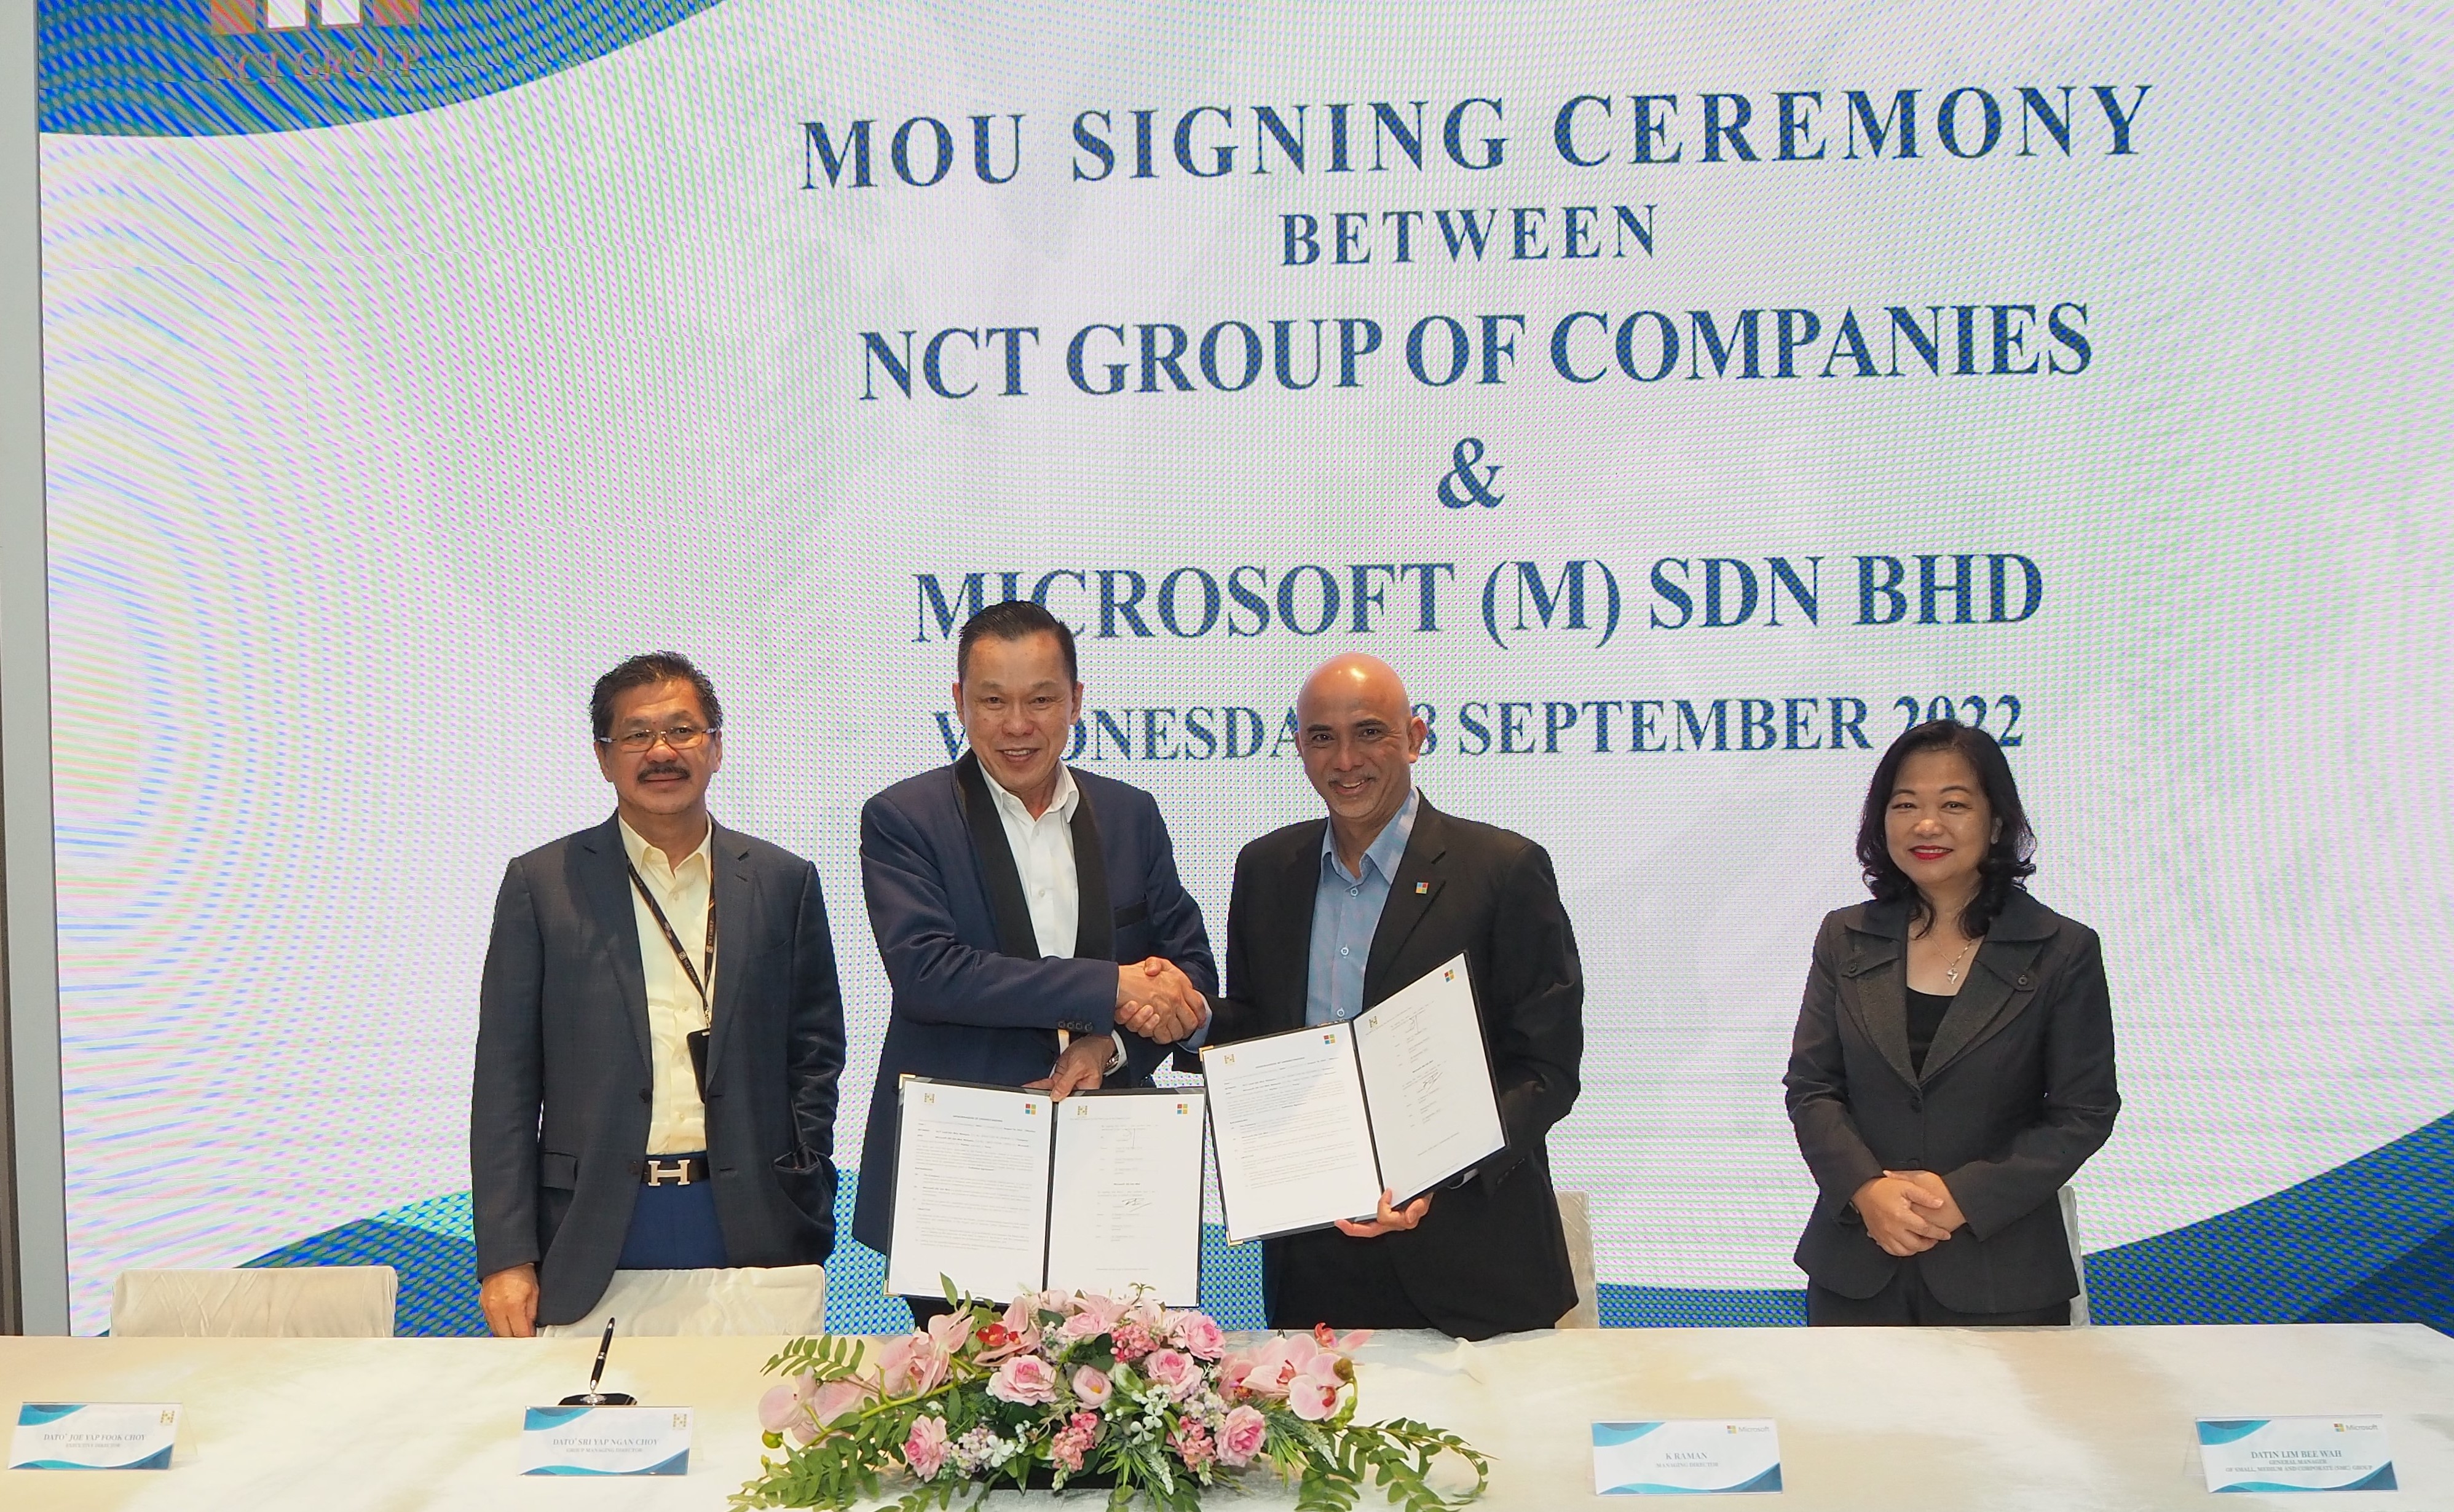 Left to right Yap Fook Choy, group executive director of NCT Group; Yap Ngan Choy, founder and group managing director of NCT Group; K Raman, managing director of Microsoft Malaysia and Lim Bee Wah, general manager of Small, Medium and Corporate Group of Microsoft Malaysia during the signing ceremony.